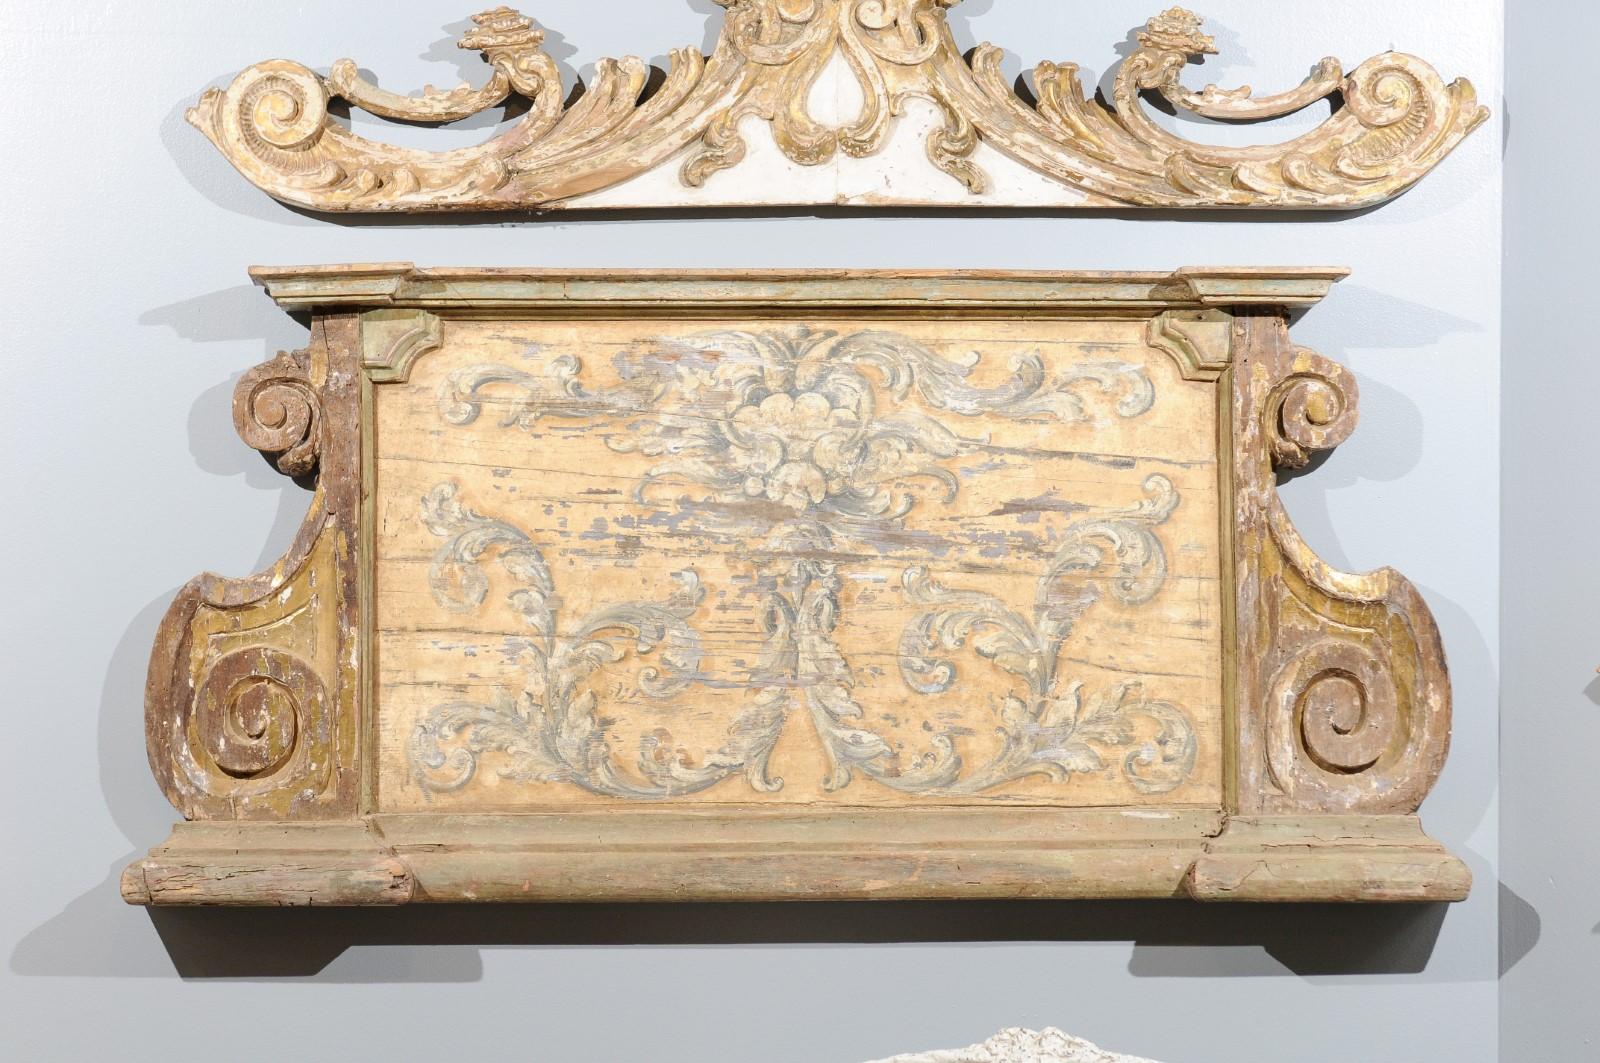 A French Baroque style painted and carved architectural panel from the 19th century, with volutes and painted scrollwork motifs. Born in France during the later years of the 19th century, this exquisite French architectural panel captures our